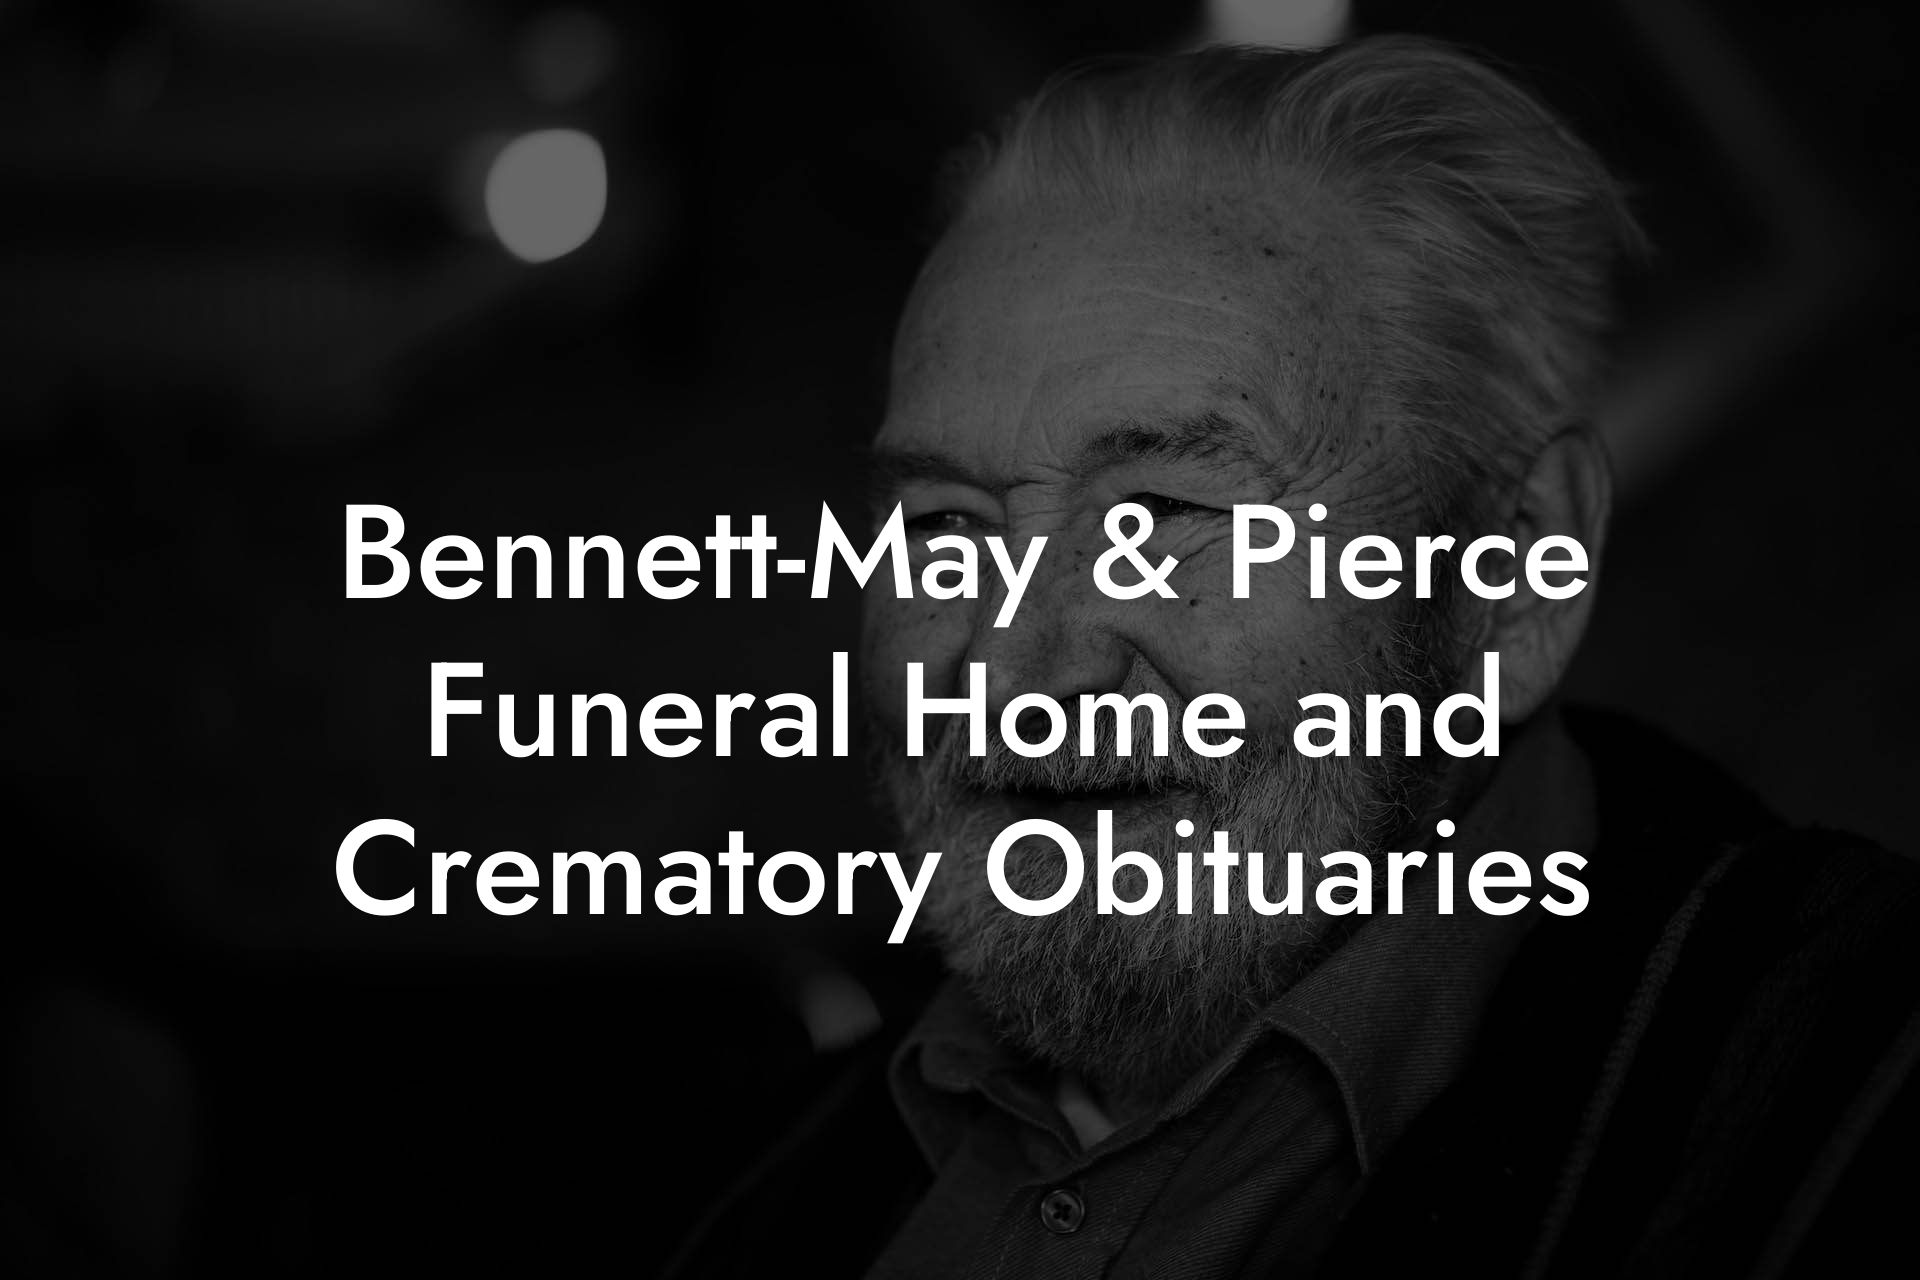 Bennett-May & Pierce Funeral Home and Crematory Obituaries